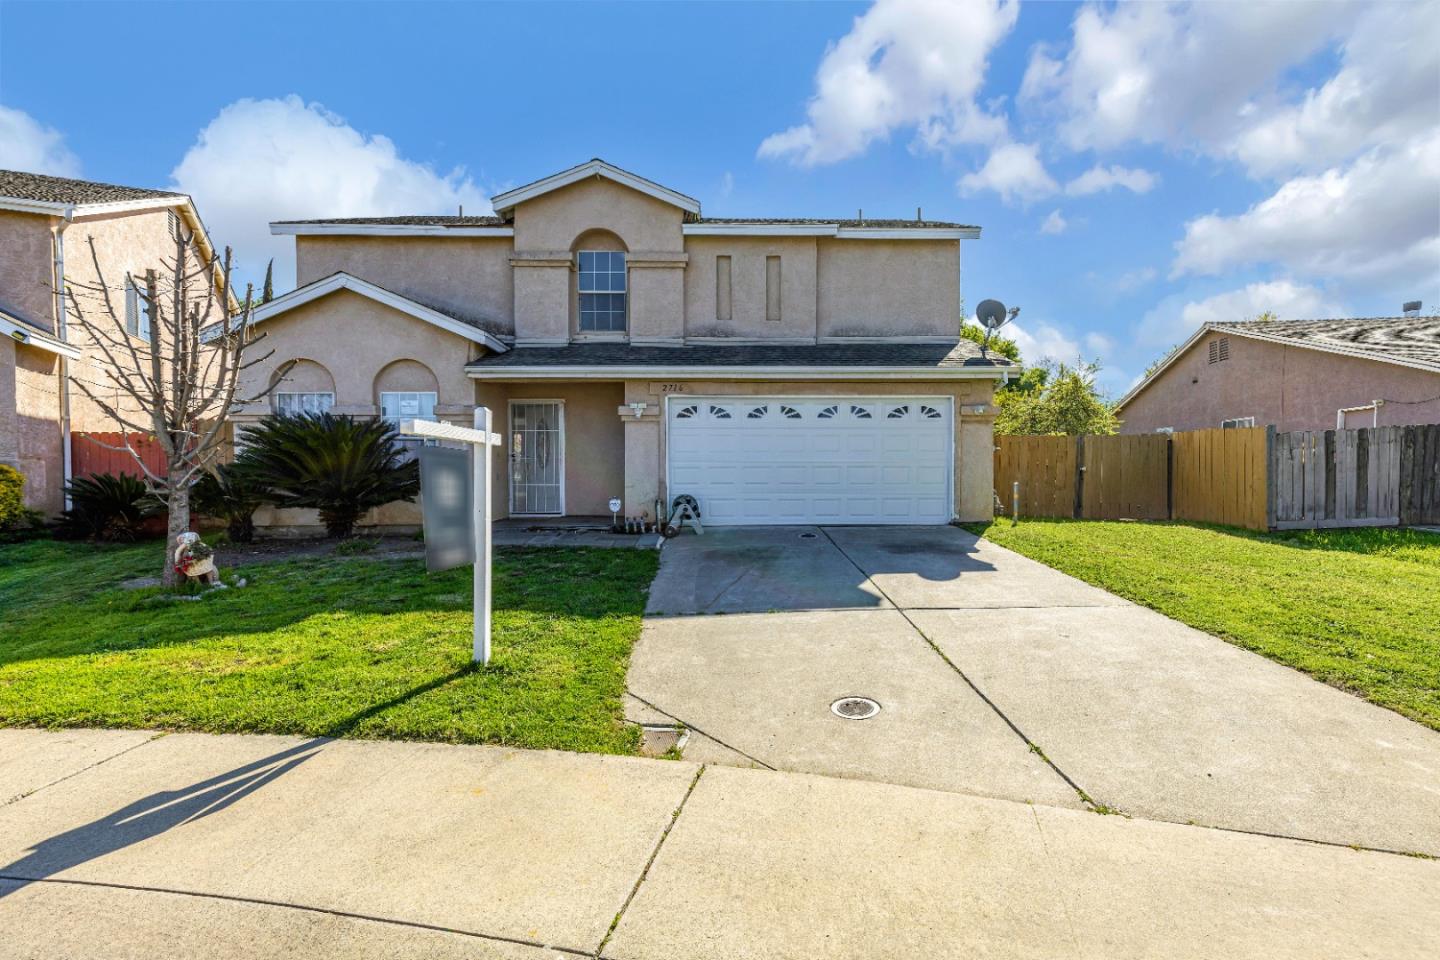 Photo of 2716 Spring Hill Dr in Stockton, CA